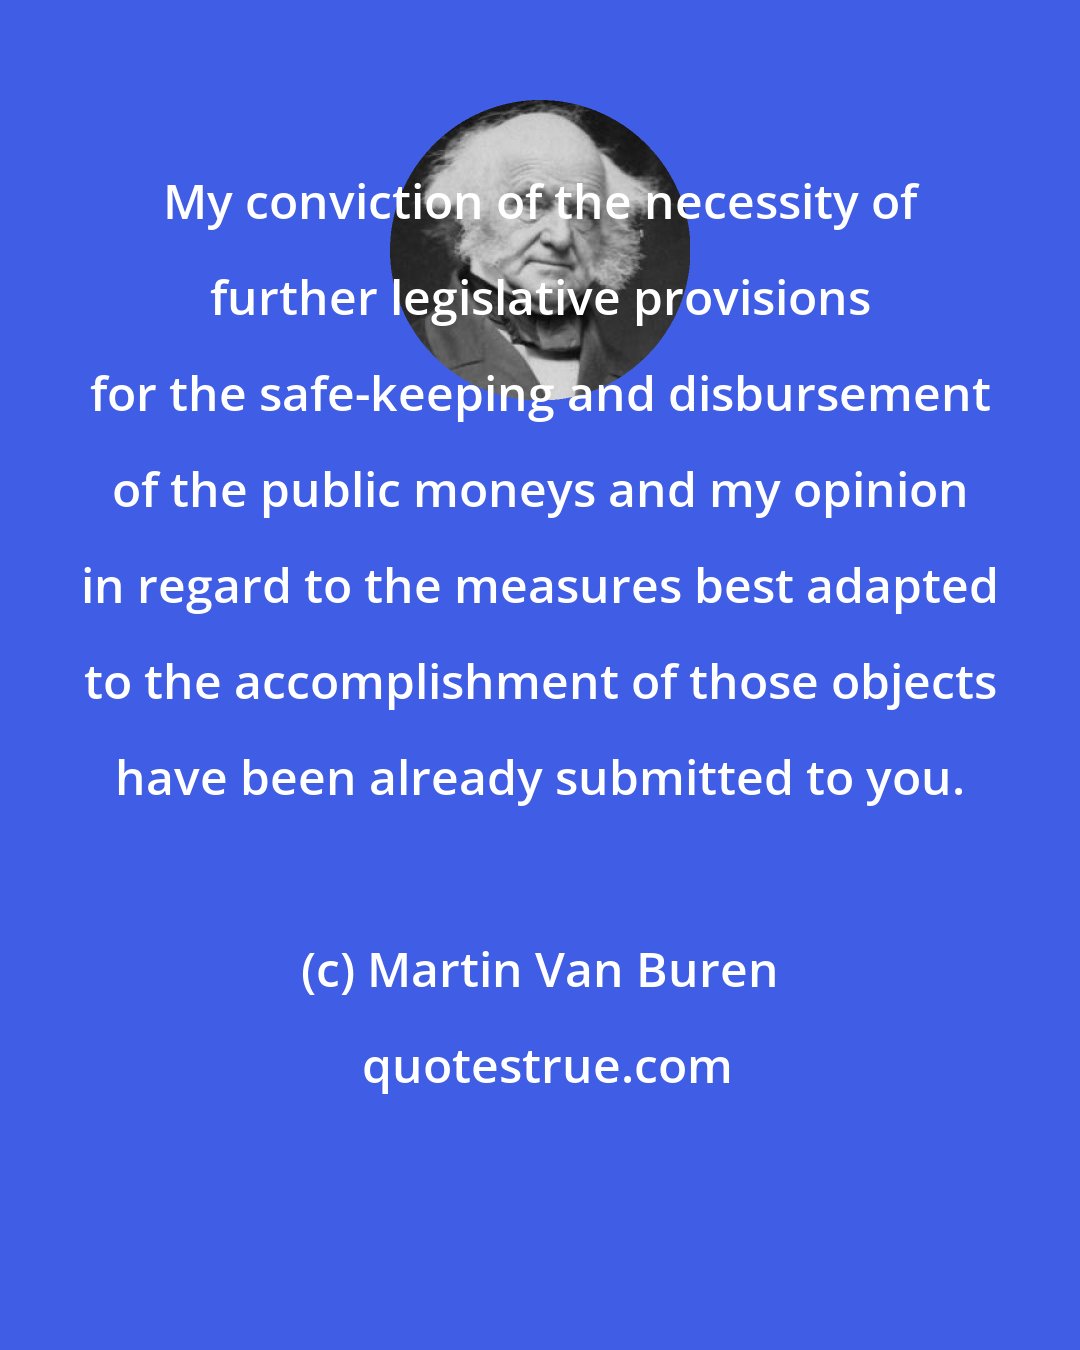 Martin Van Buren: My conviction of the necessity of further legislative provisions for the safe-keeping and disbursement of the public moneys and my opinion in regard to the measures best adapted to the accomplishment of those objects have been already submitted to you.